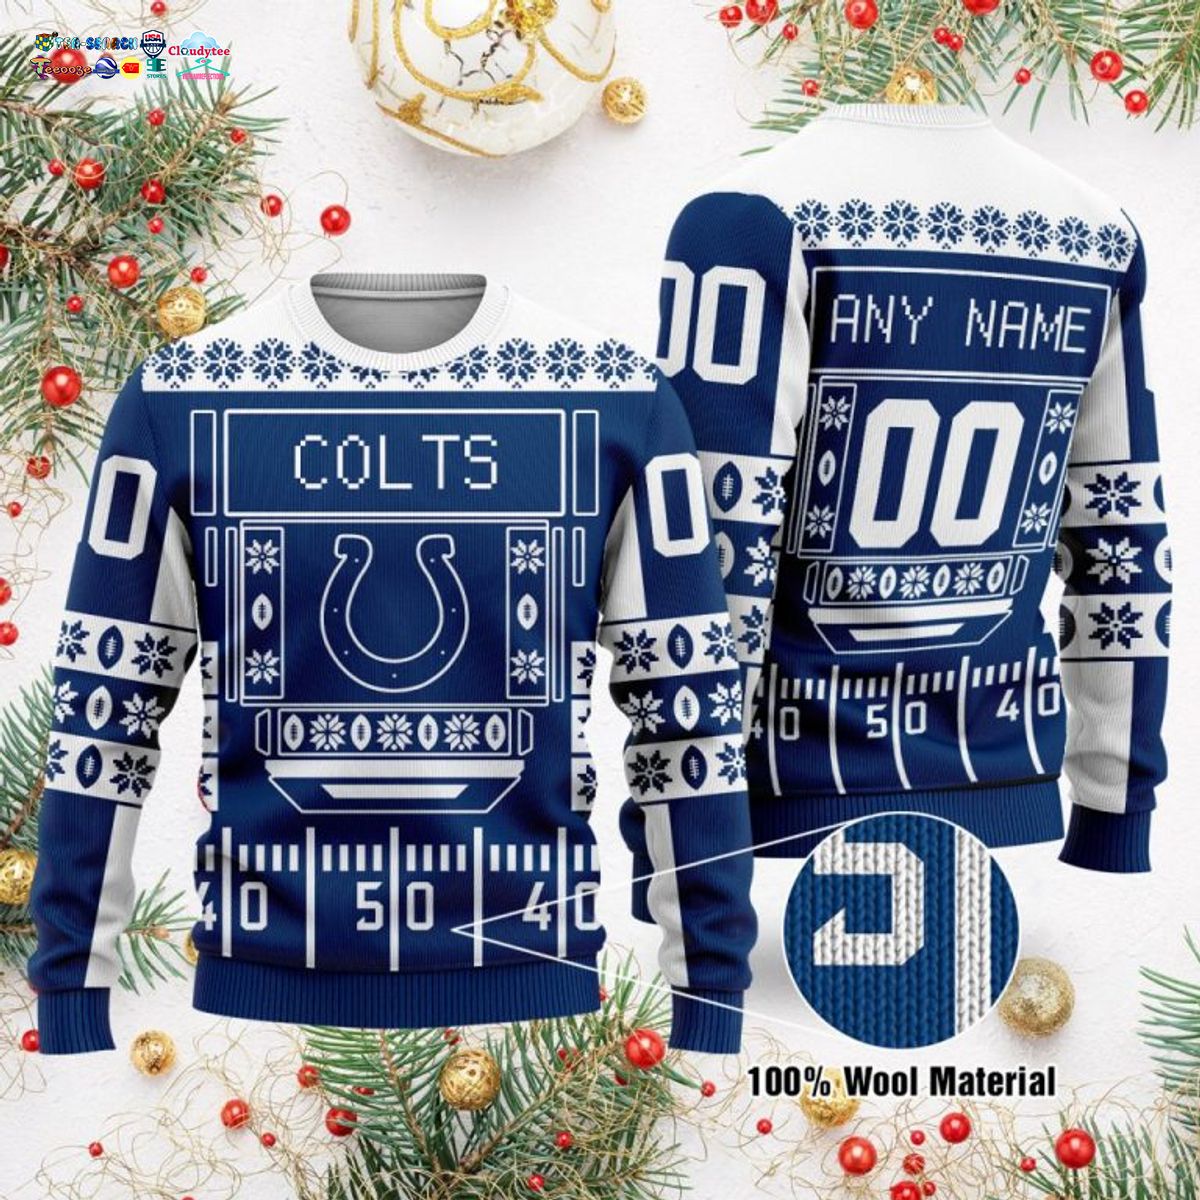 Personalized Indianapolis Colts Ugly Christmas Sweater - Stand easy bro